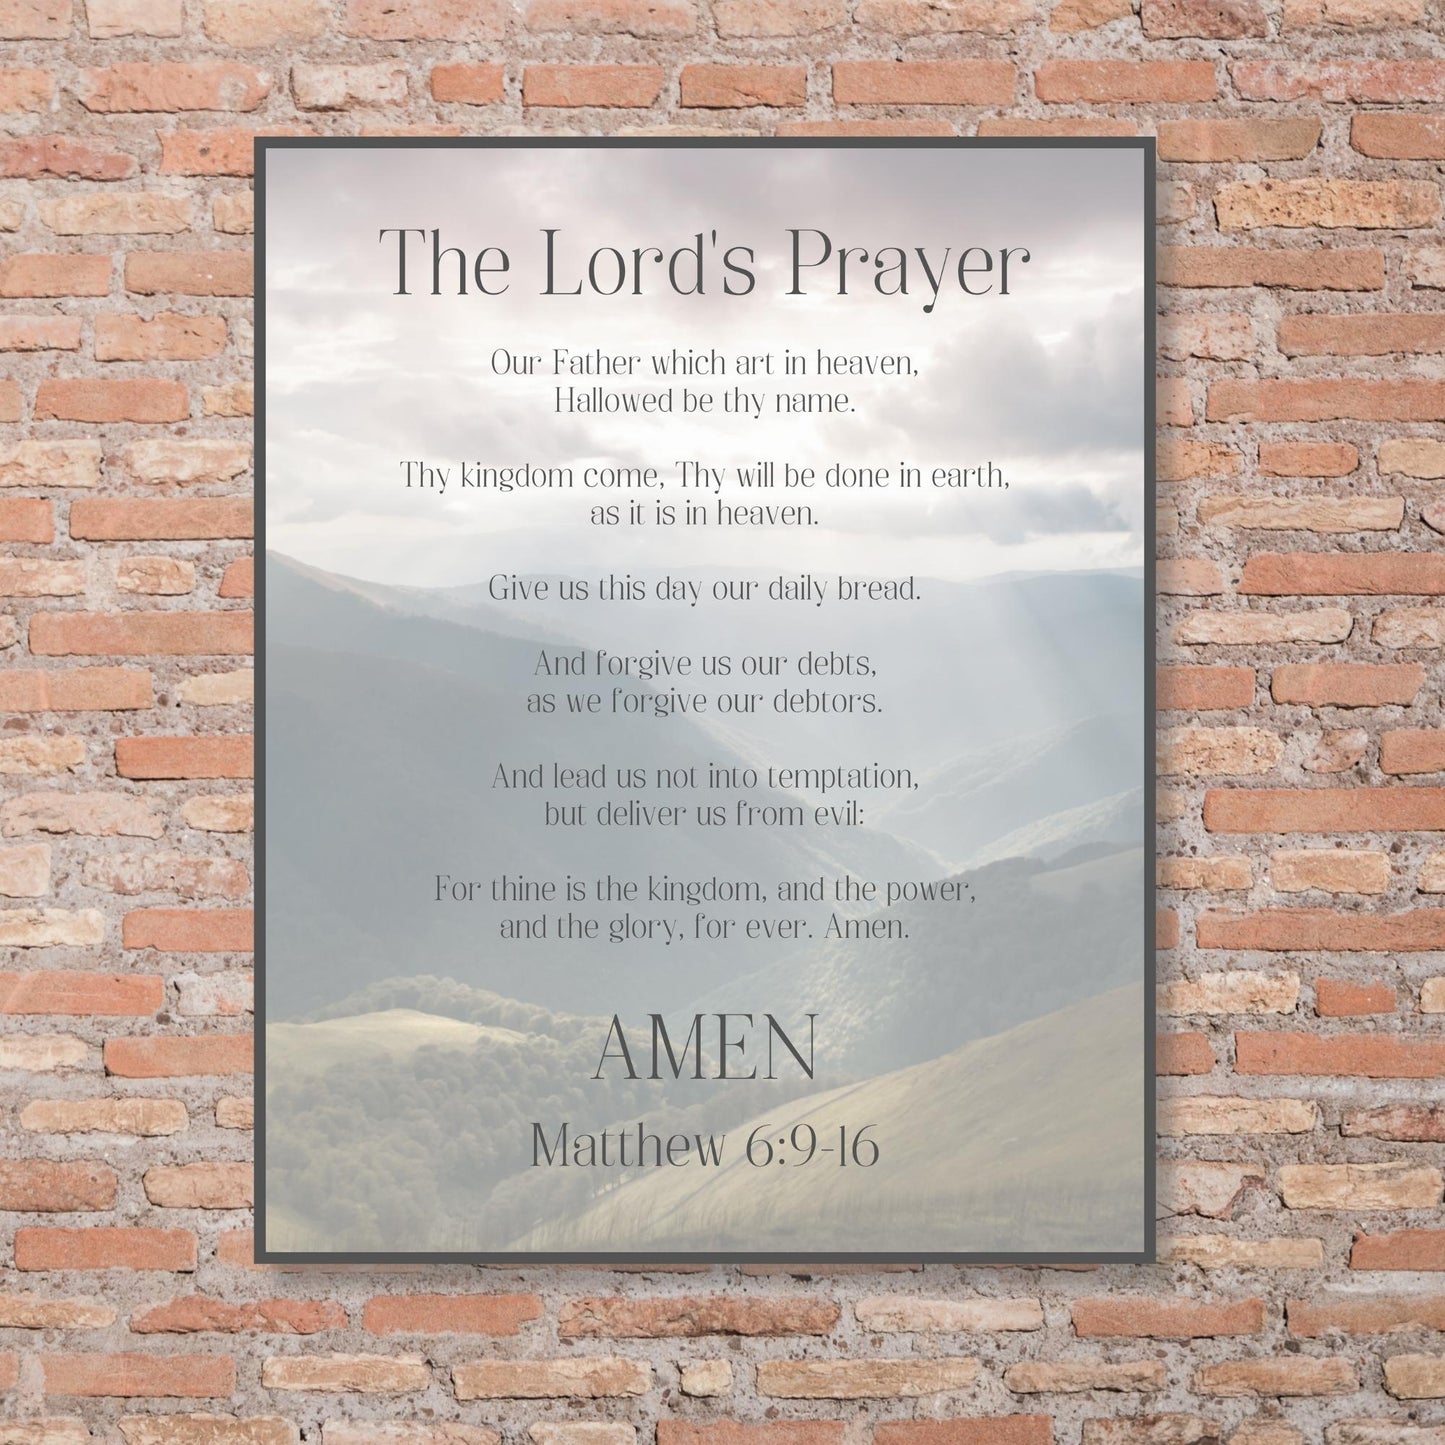 Inspirational Bible Verse Wall Art - The Lord's Prayer, Our Father (Matthew 6:9-16) Christian Wall Poster (16x20) | Shown on interior brick wall | oak7west.com